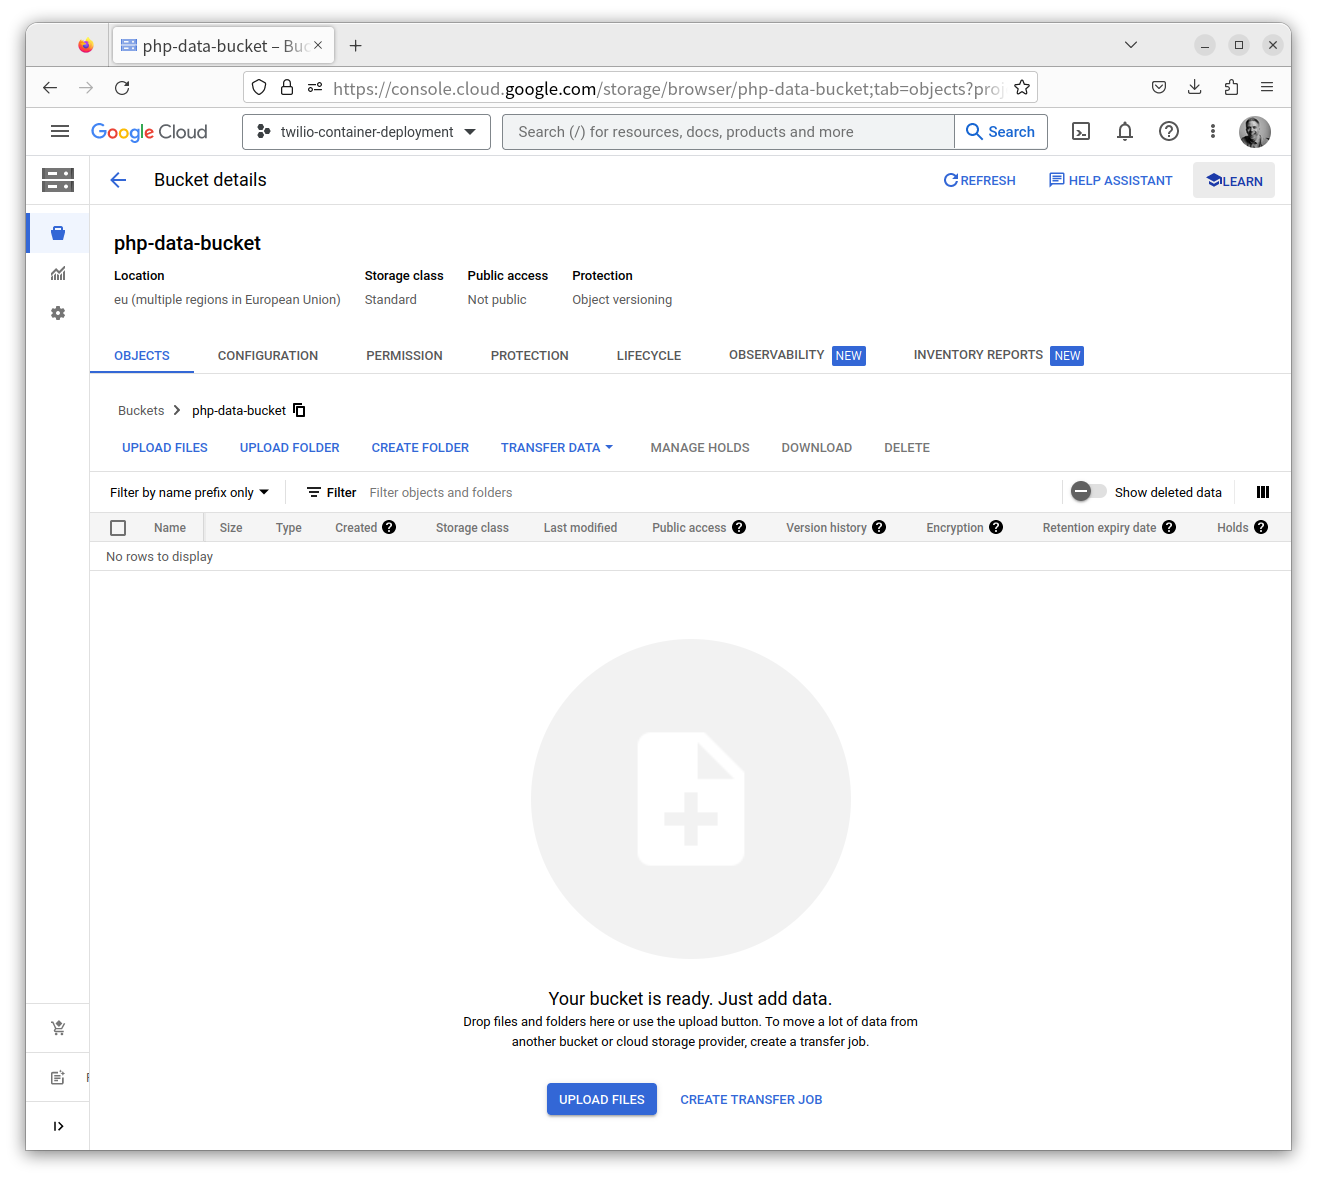 A newly created bucket, containing no objects in the Google Cloud Storage Console